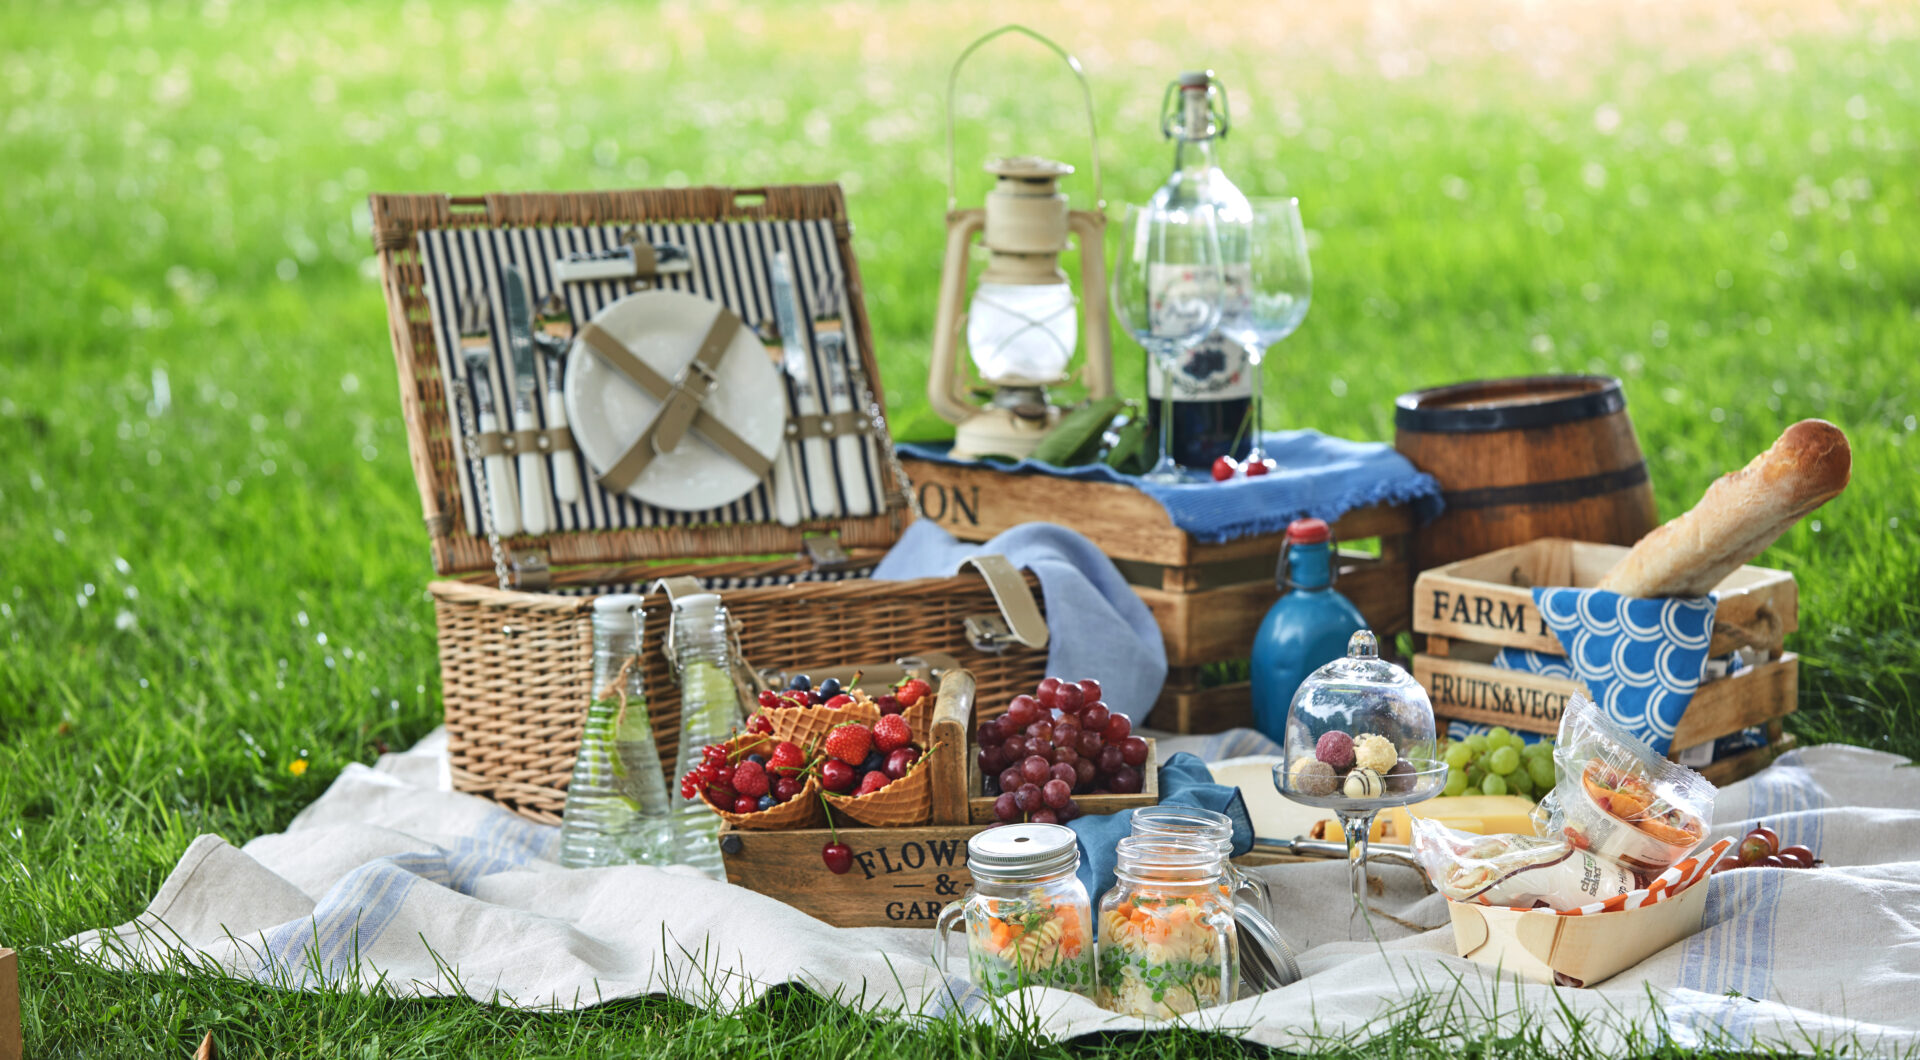 Vintage picnic hamper with lunch in a park